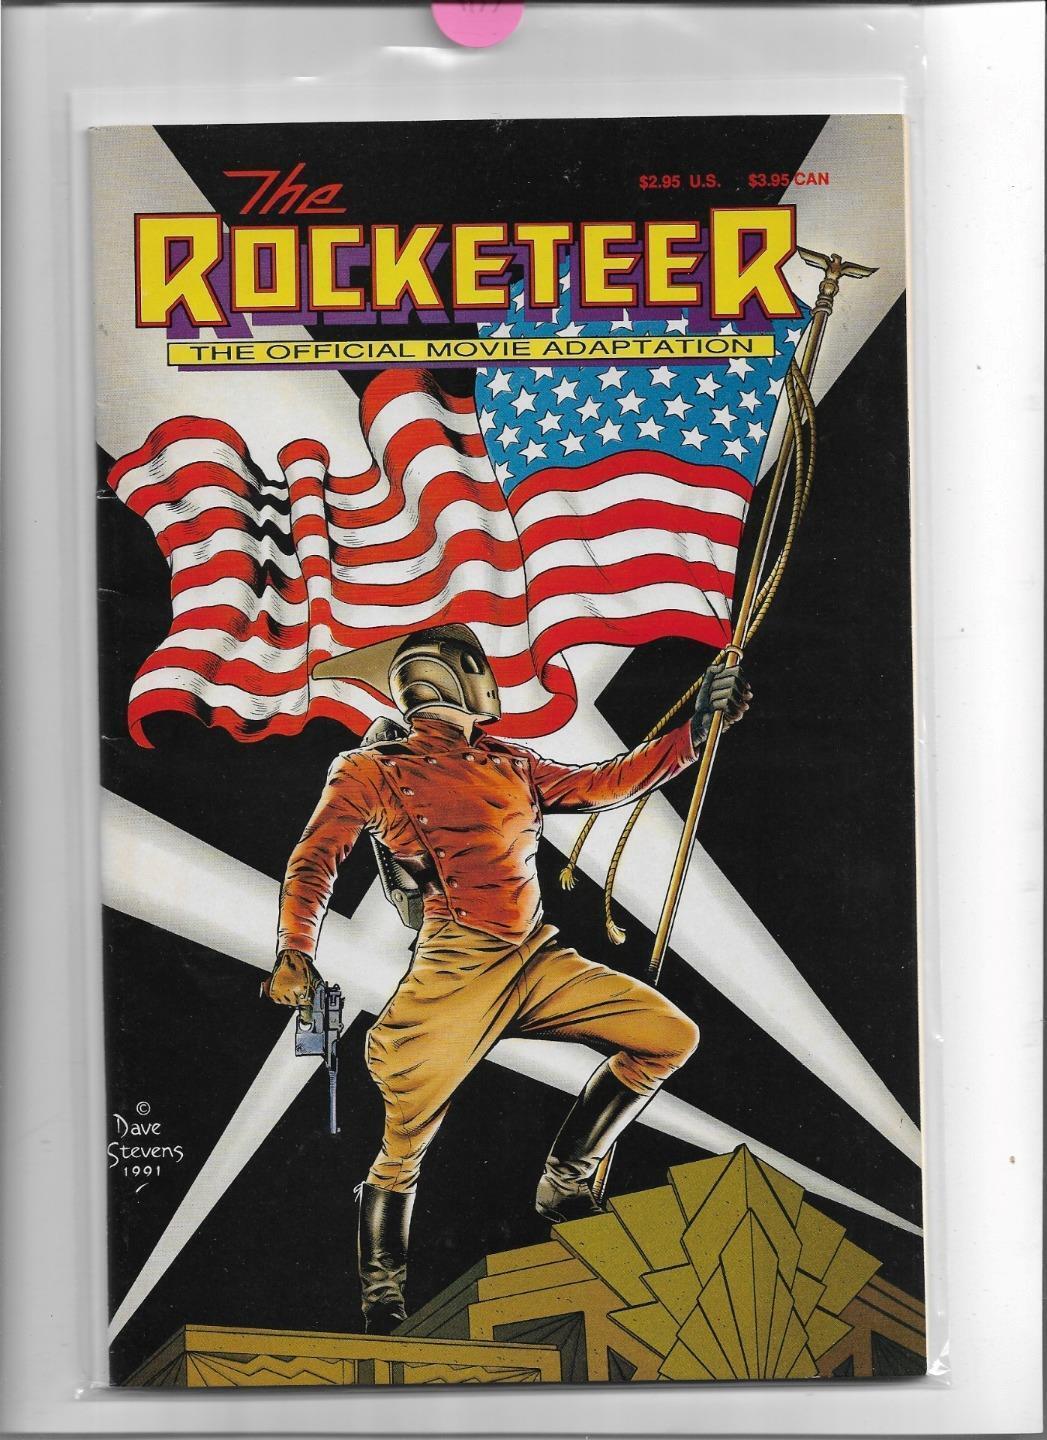 THE ROCKETEER THE OFFICIAL MOVIE ADAPTATION #1 1991 VERY FINE+ 8.5 4133